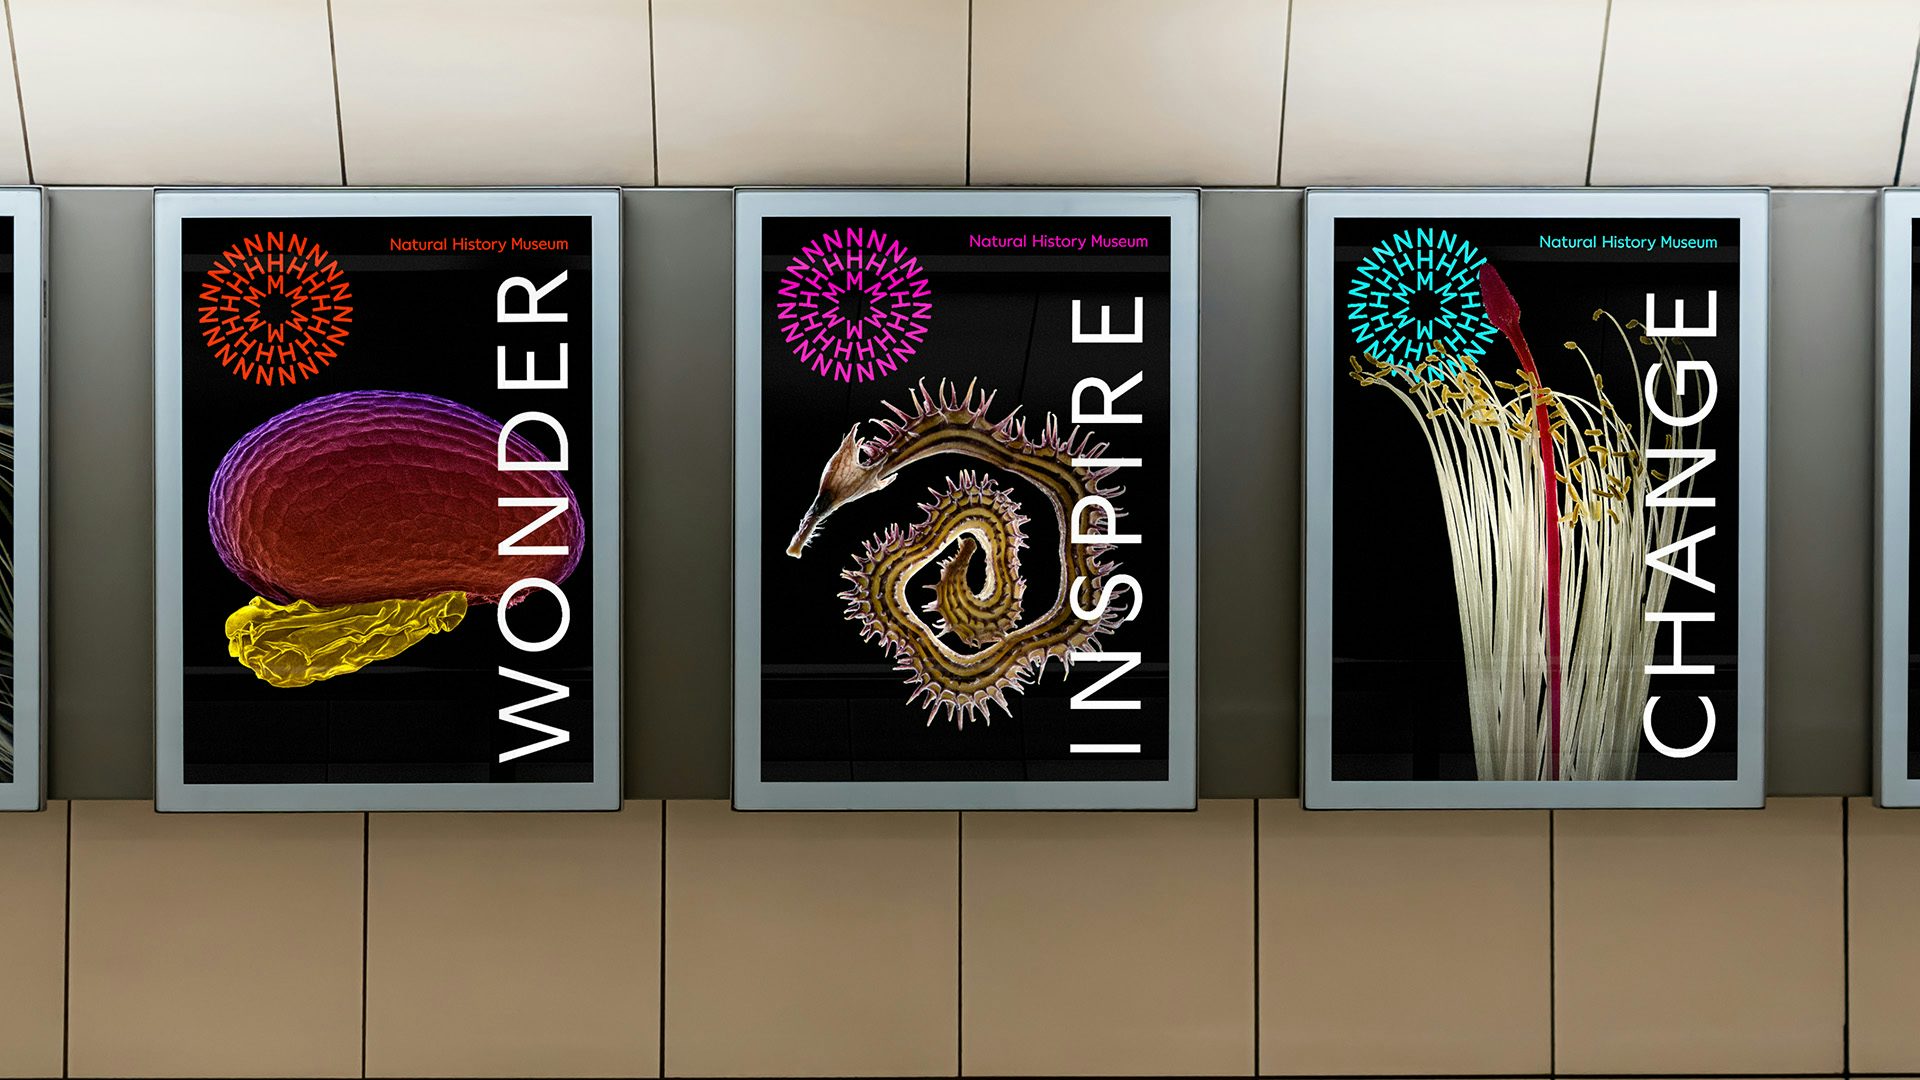 Image shows the new Natural History Museum branding on three outdoor posters headlined 'Wonder', 'Inspire', and 'Change' on top of images of scientific specimens